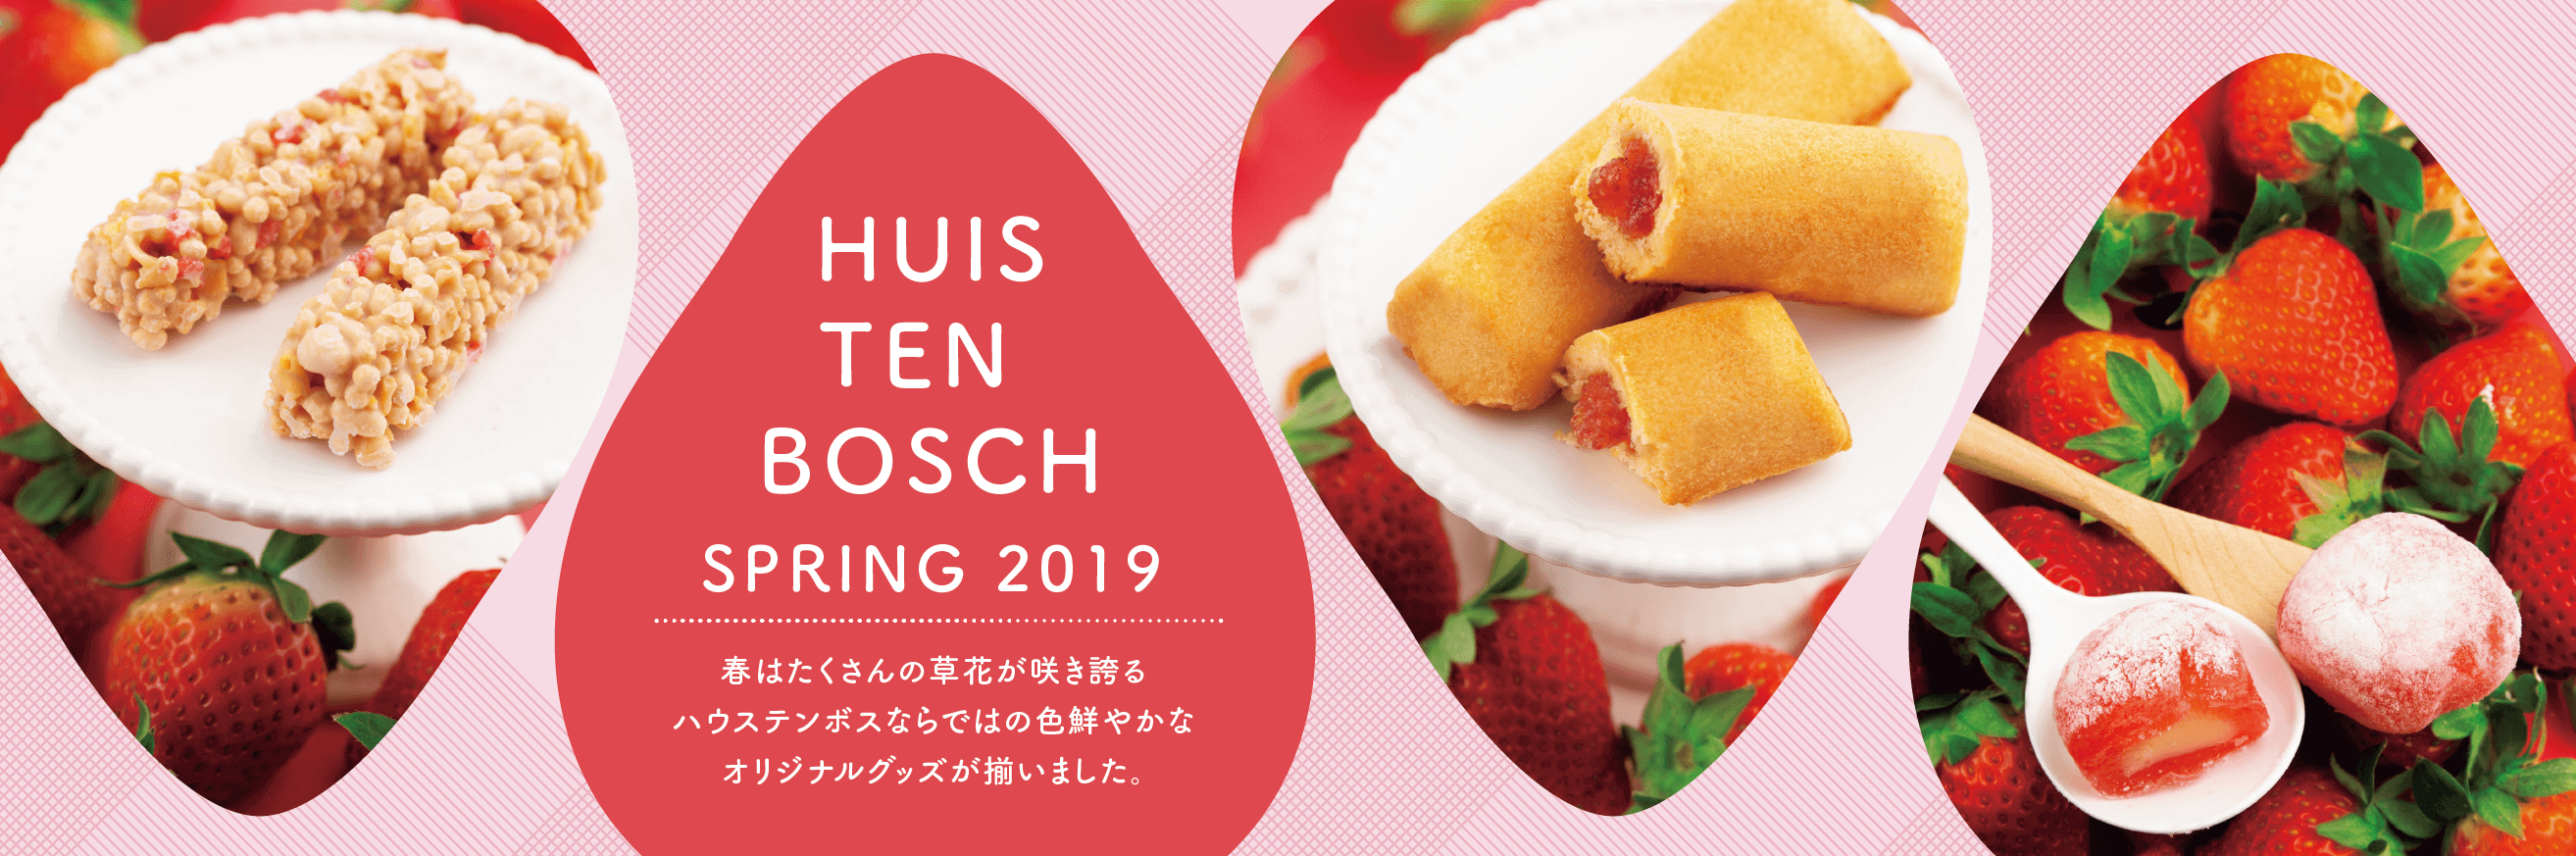 HUIS TEN BOSCH SPRING 2019 In the spring, we have a lineup of colorful original goods unique to Huis Ten Bosch